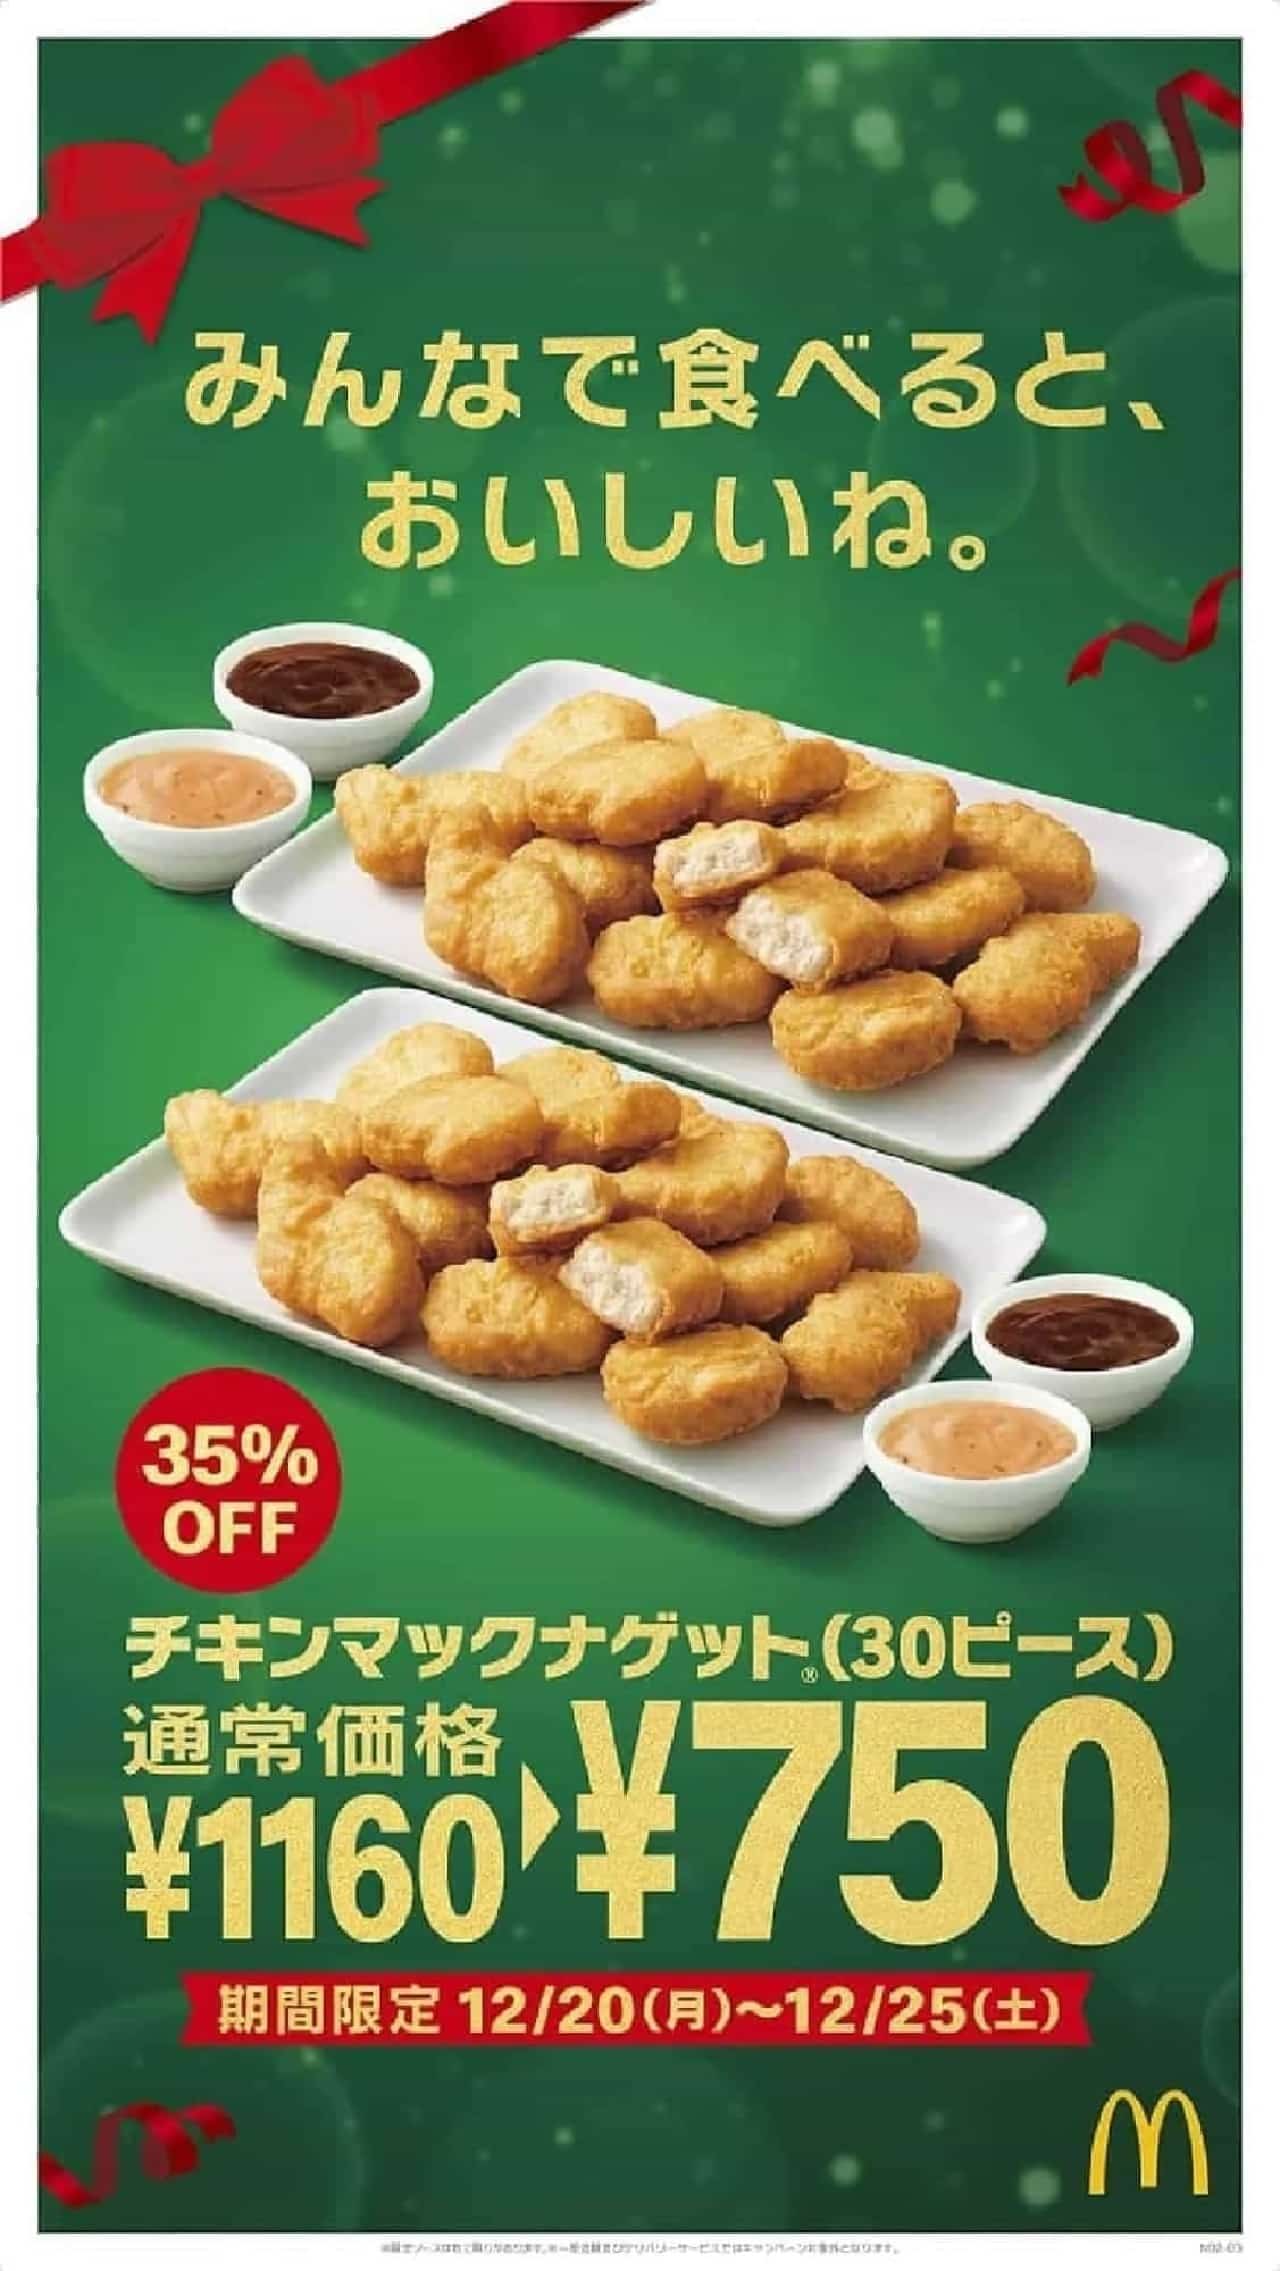 McDonald's "Chicken McNugget 30 Pieces (with 6 Sauces)"